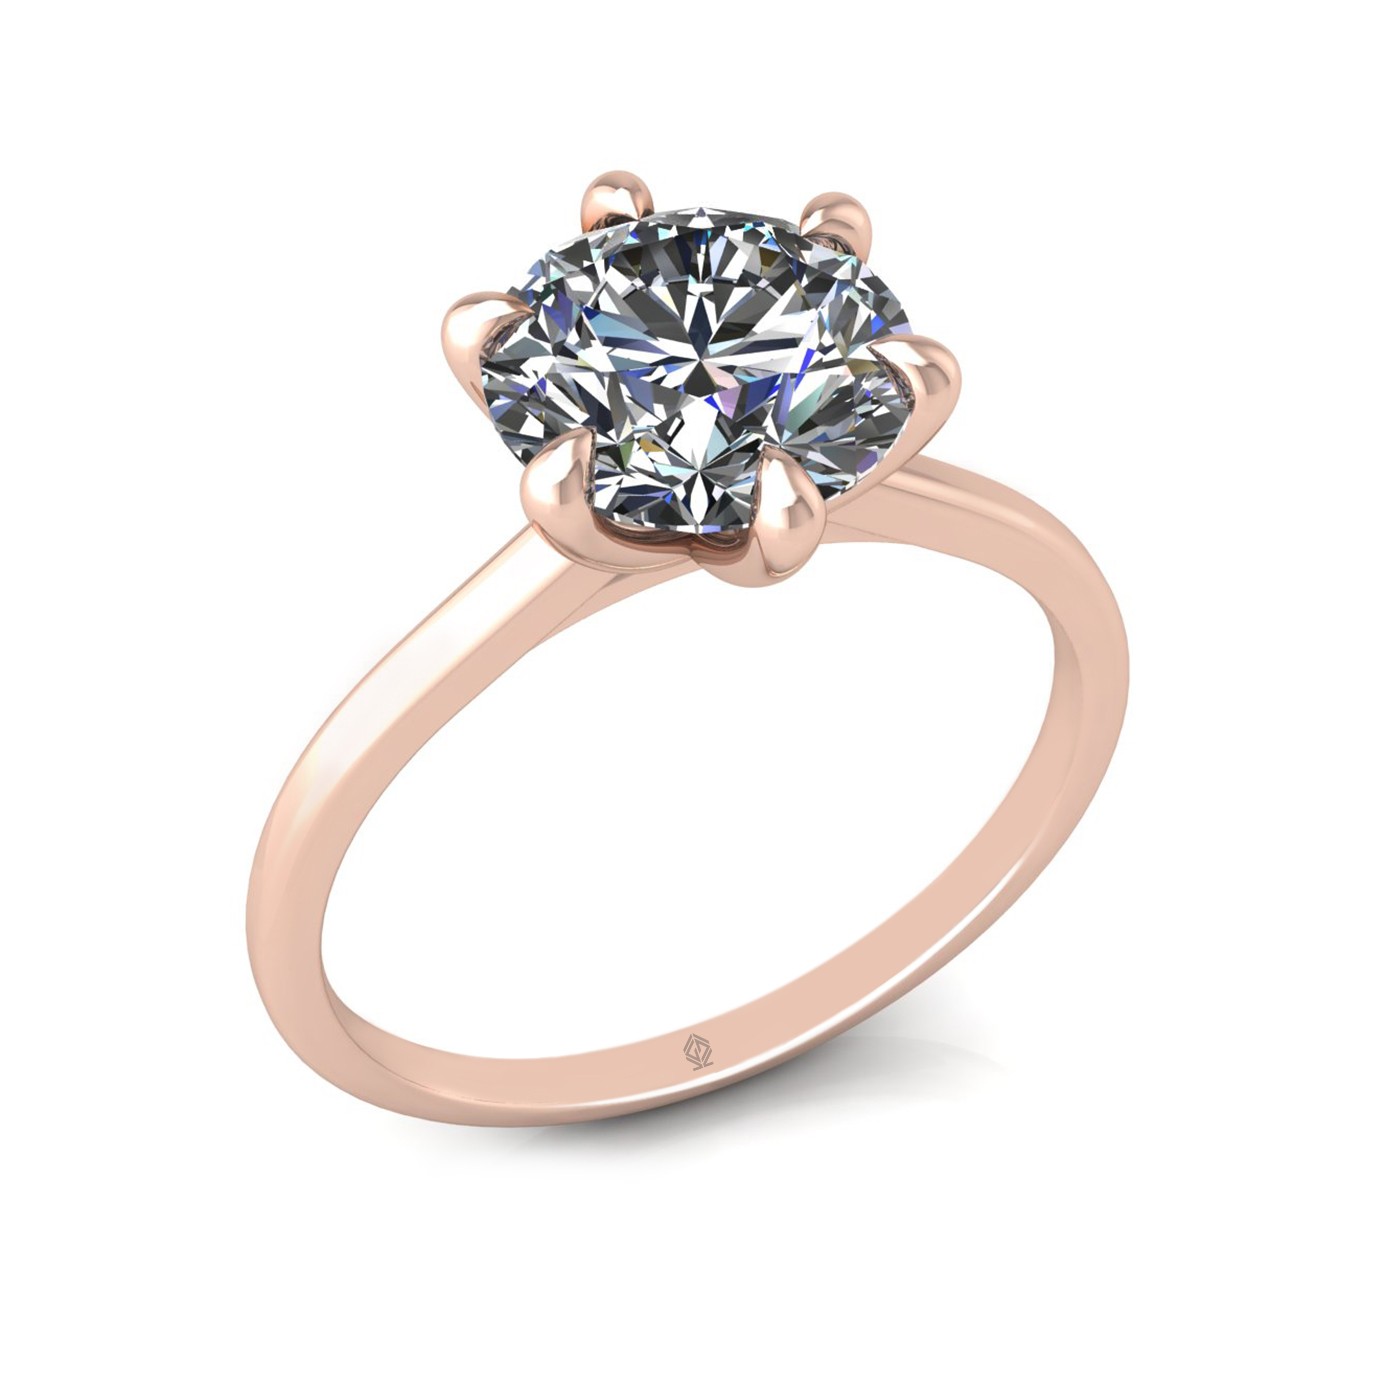 18k rose gold 2,00 ct 6 prongs solitaire round cut diamond engagement ring with whisper thin band